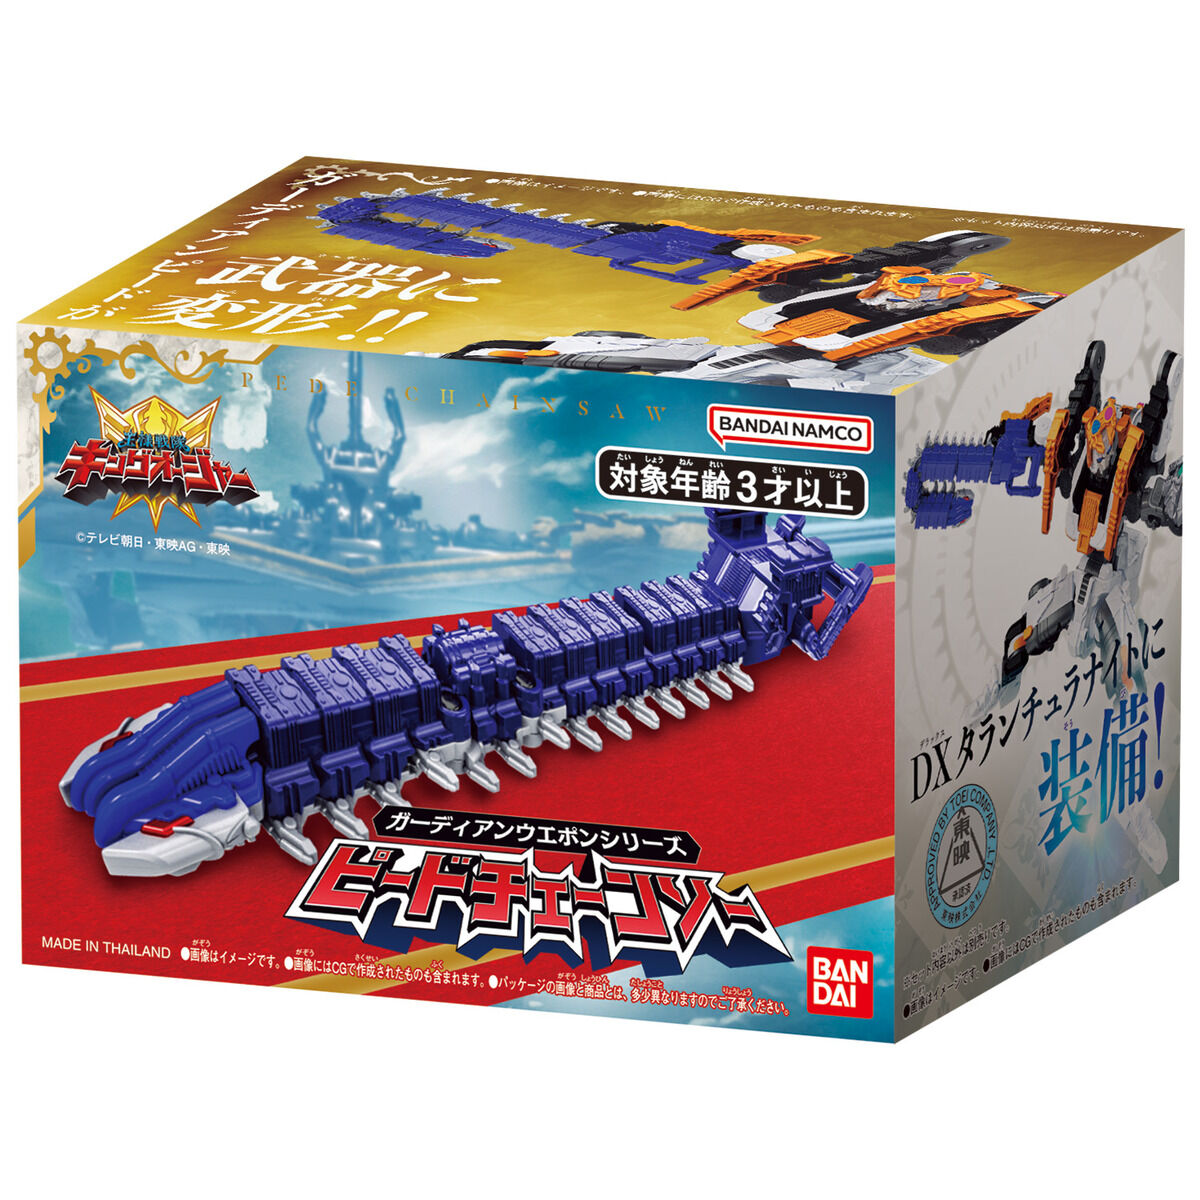 DX Guardian Weapon Pede Chainsaw